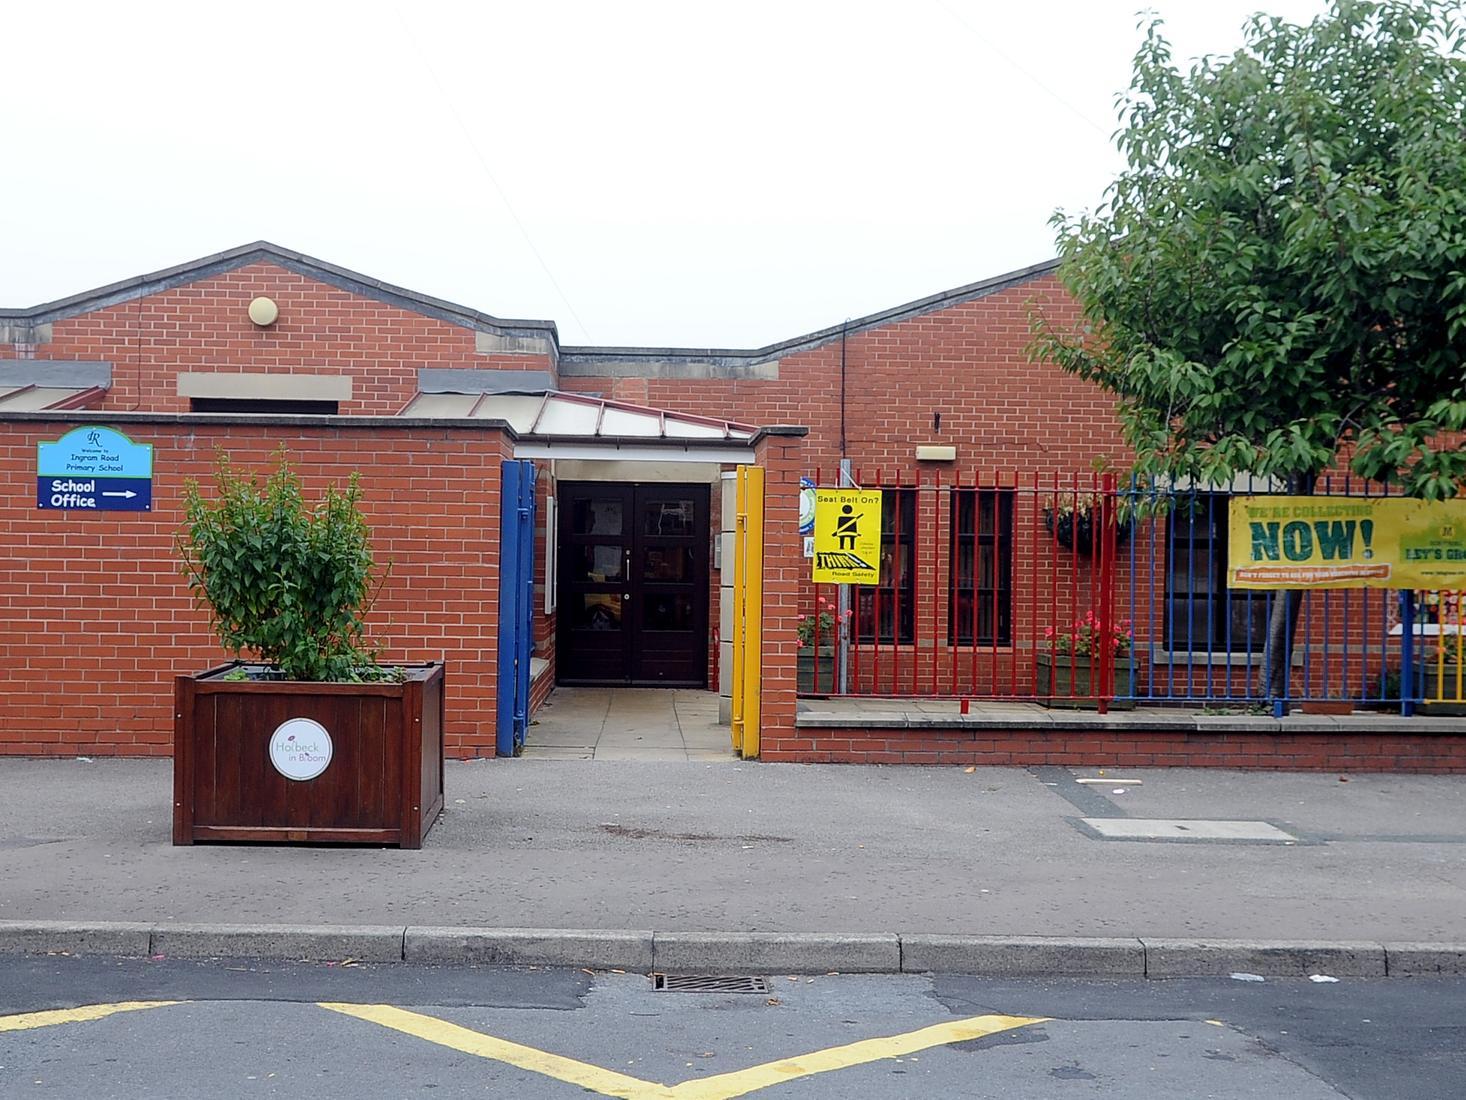 25 per cent of pupils at Ingram Road Primary School met their expected standard